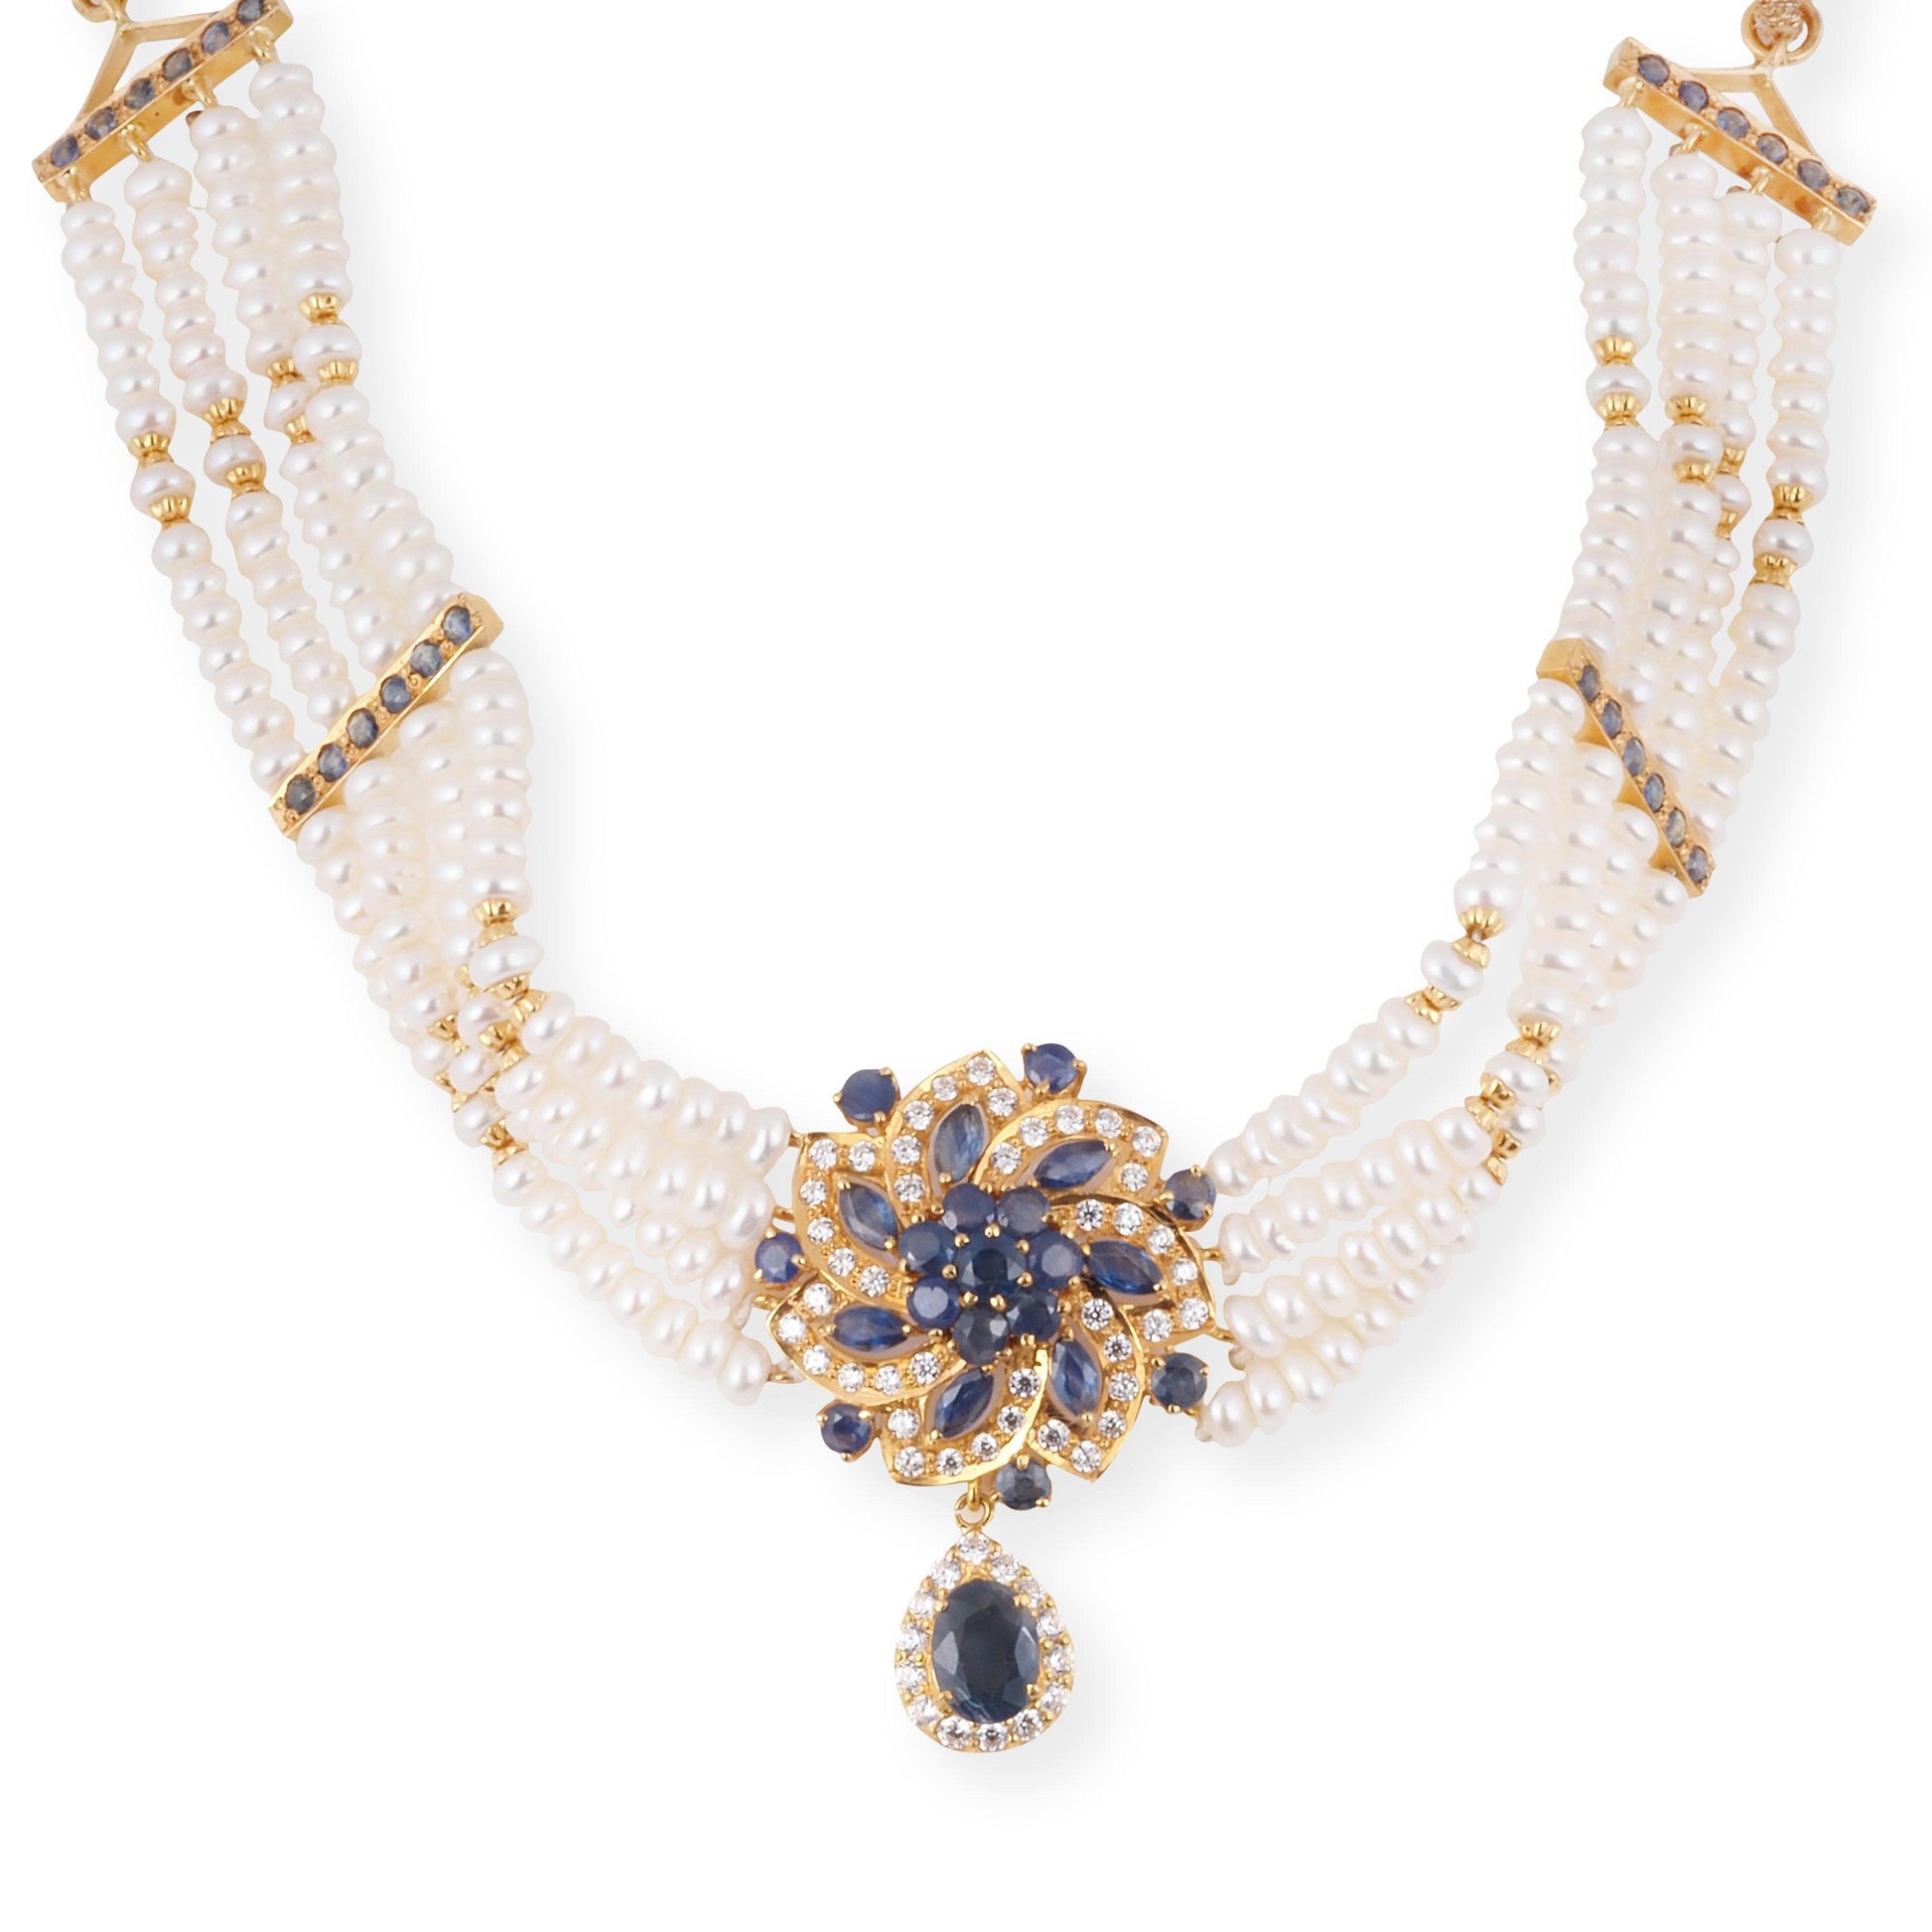 22ct Gold Choker Necklace Suite with Cultured Pearls and Blue & White Cubic Zirconia Stones with Adjustable String-8600 - Minar Jewellers